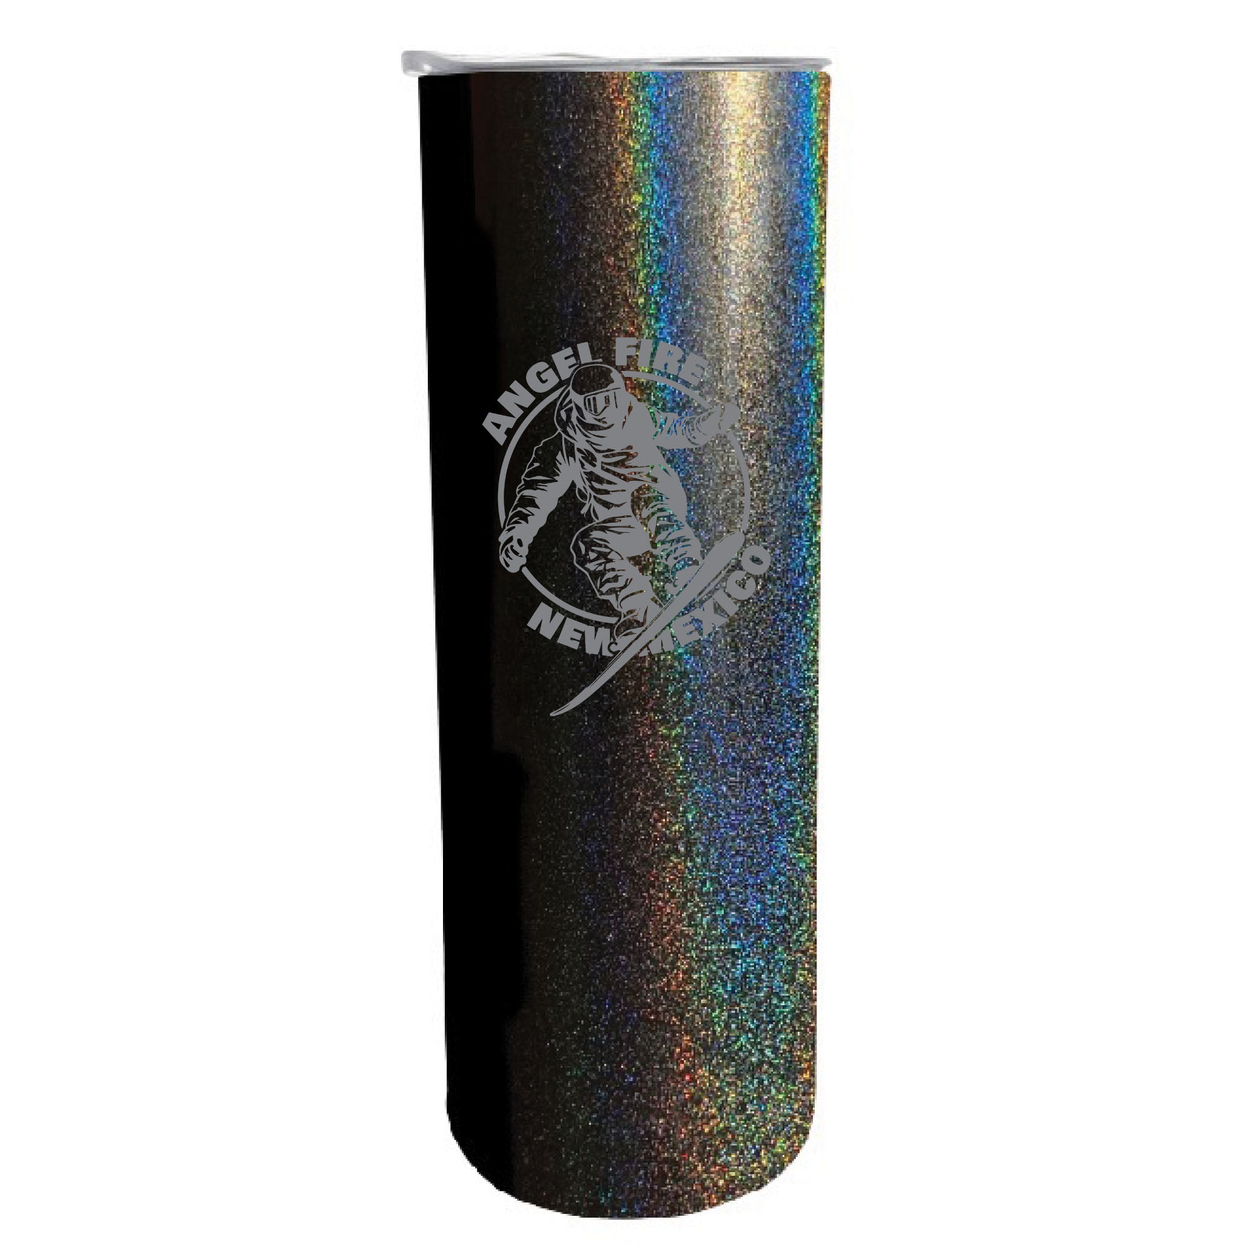 Angel Fire New Mexico Souvenir 20 Oz Engraved Insulated Stainless Steel Skinny Tumbler - Black Glitter,,4-Pack